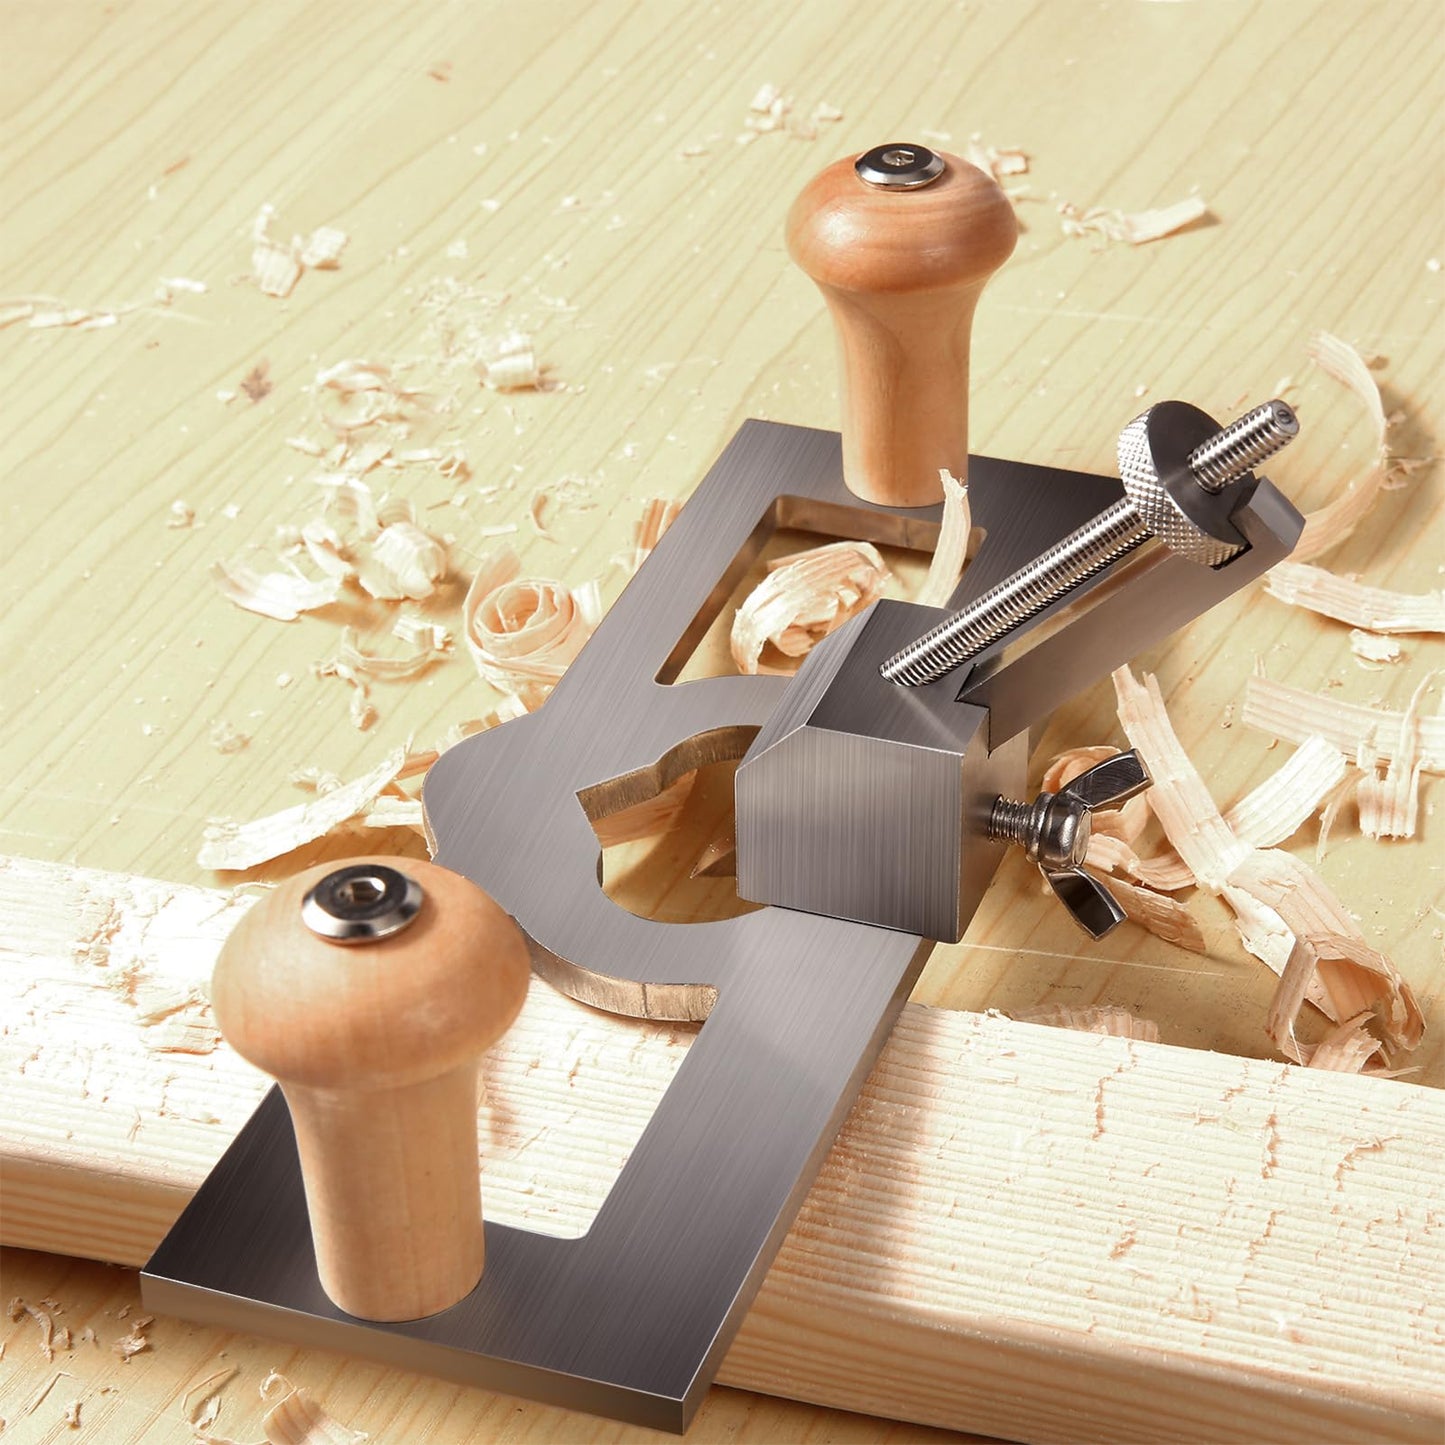 Wood Planer Hand Tool, Pocket Plane Hand Planer Wood Trimming Plane DIY Woodcraft for Precision Woodworking